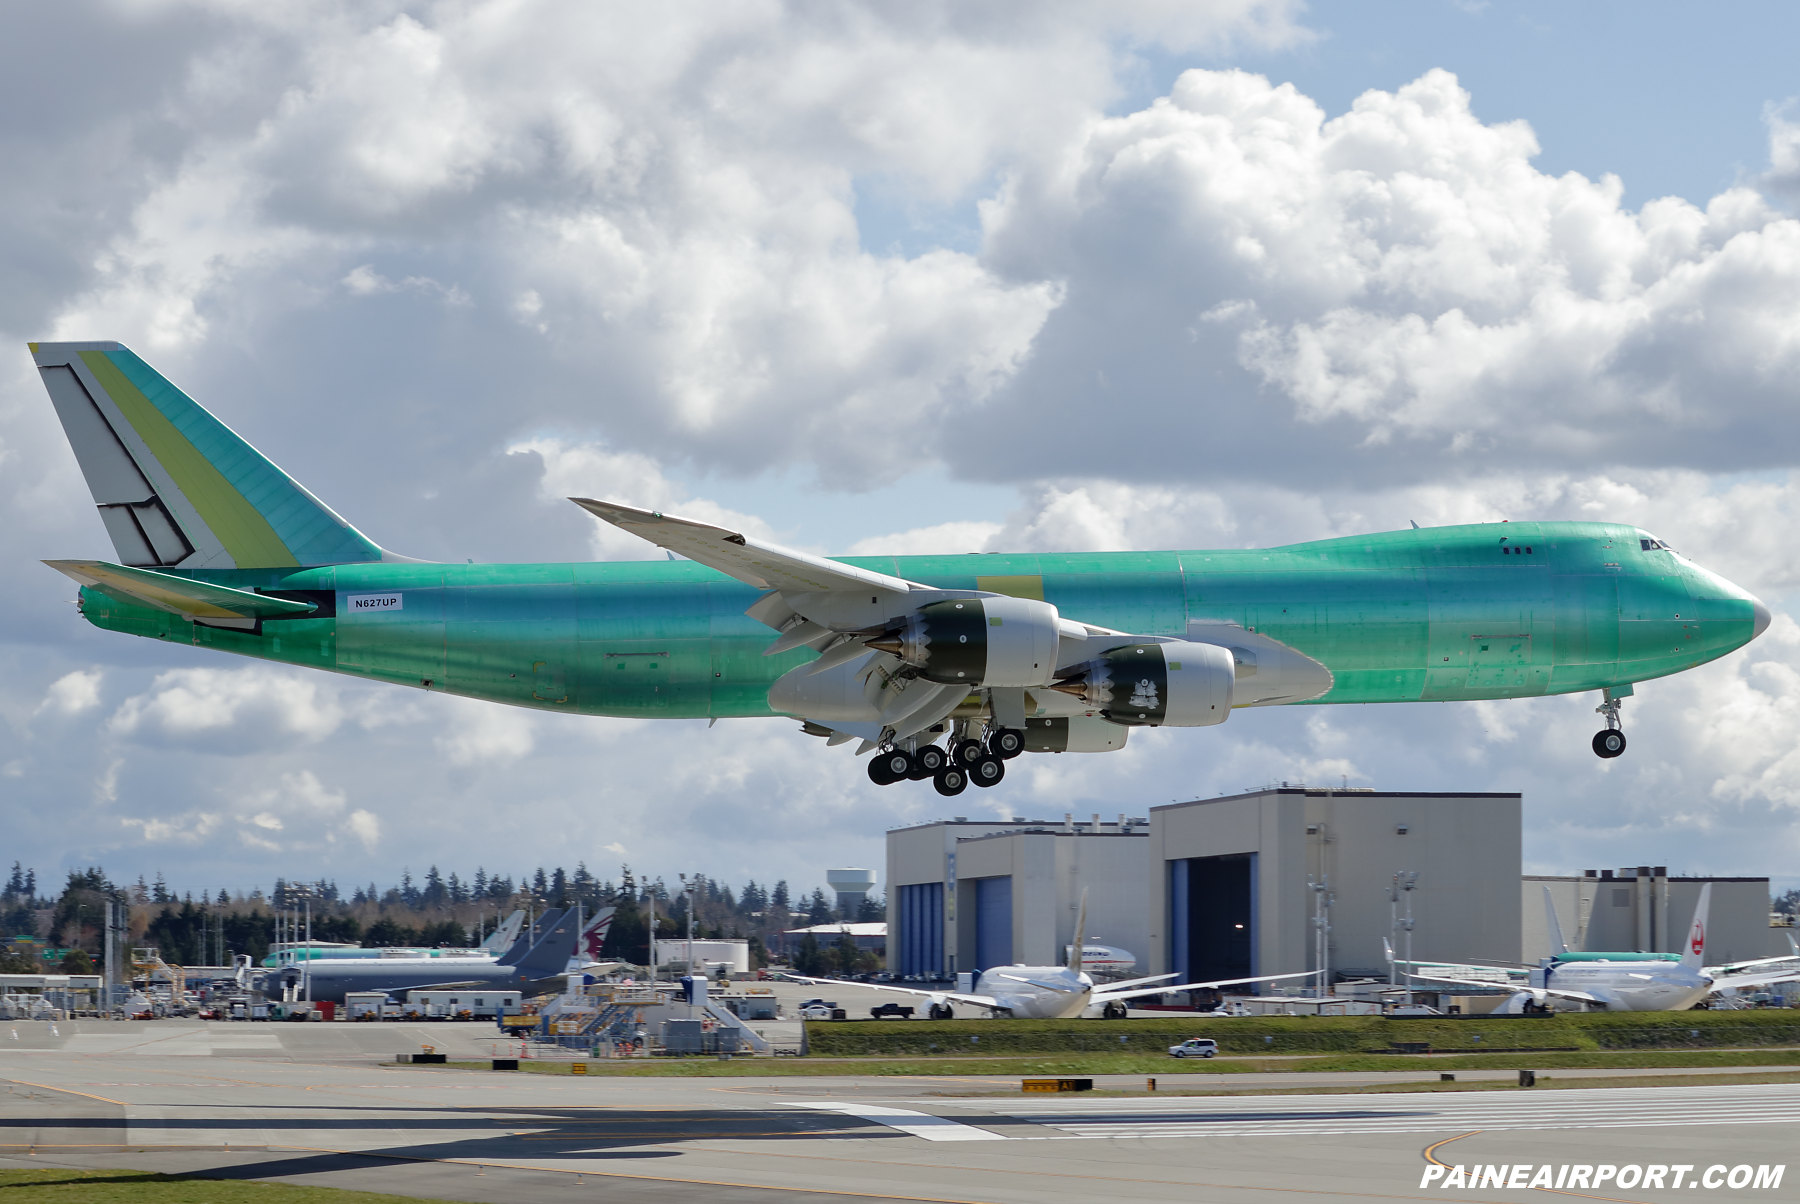 UPS 747-8F N627UP at KPAE Paine Field